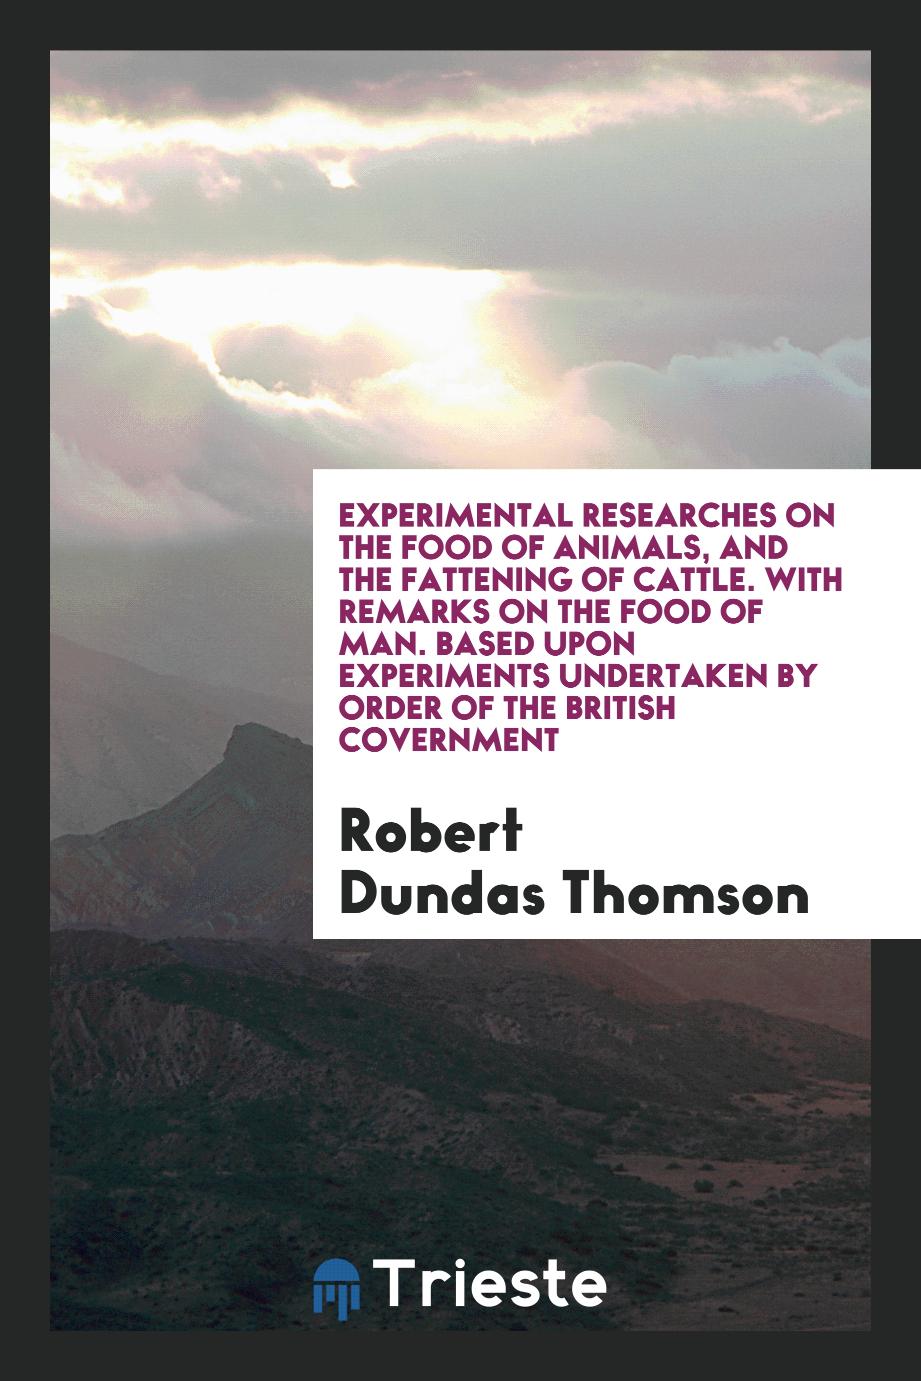 Experimental Researches on the Food of Animals, and the Fattening of Cattle. With Remarks on the Food of Man. Based Upon Experiments Undertaken by Order of the British Covernment